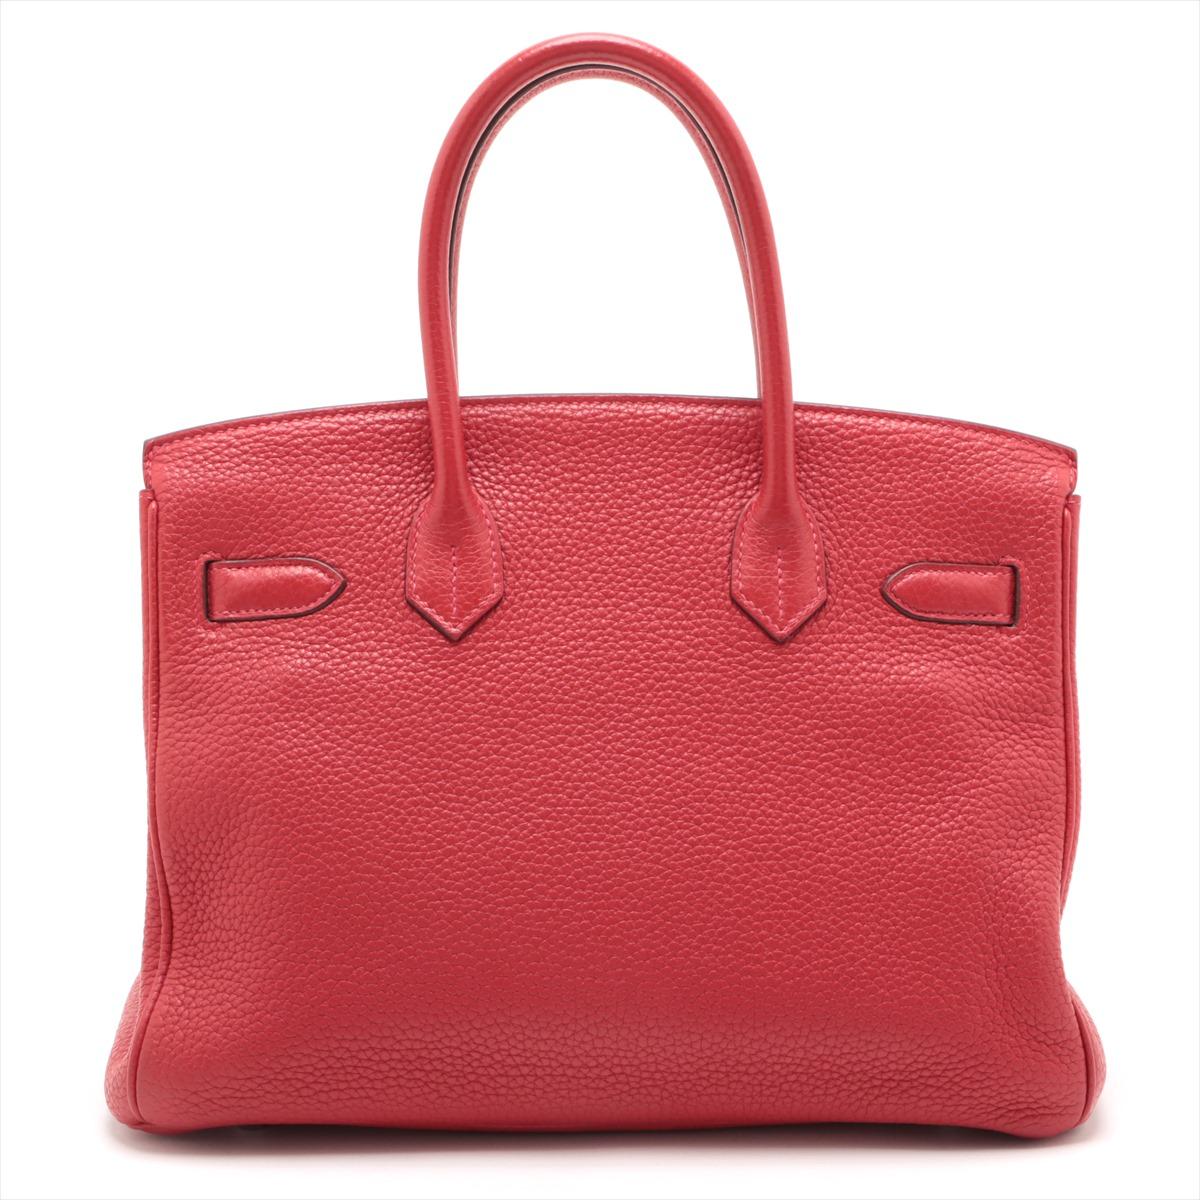 Hermes Birkin 30 Taurillon Clemence Rouge In Good Condition For Sale In Indianapolis, IN